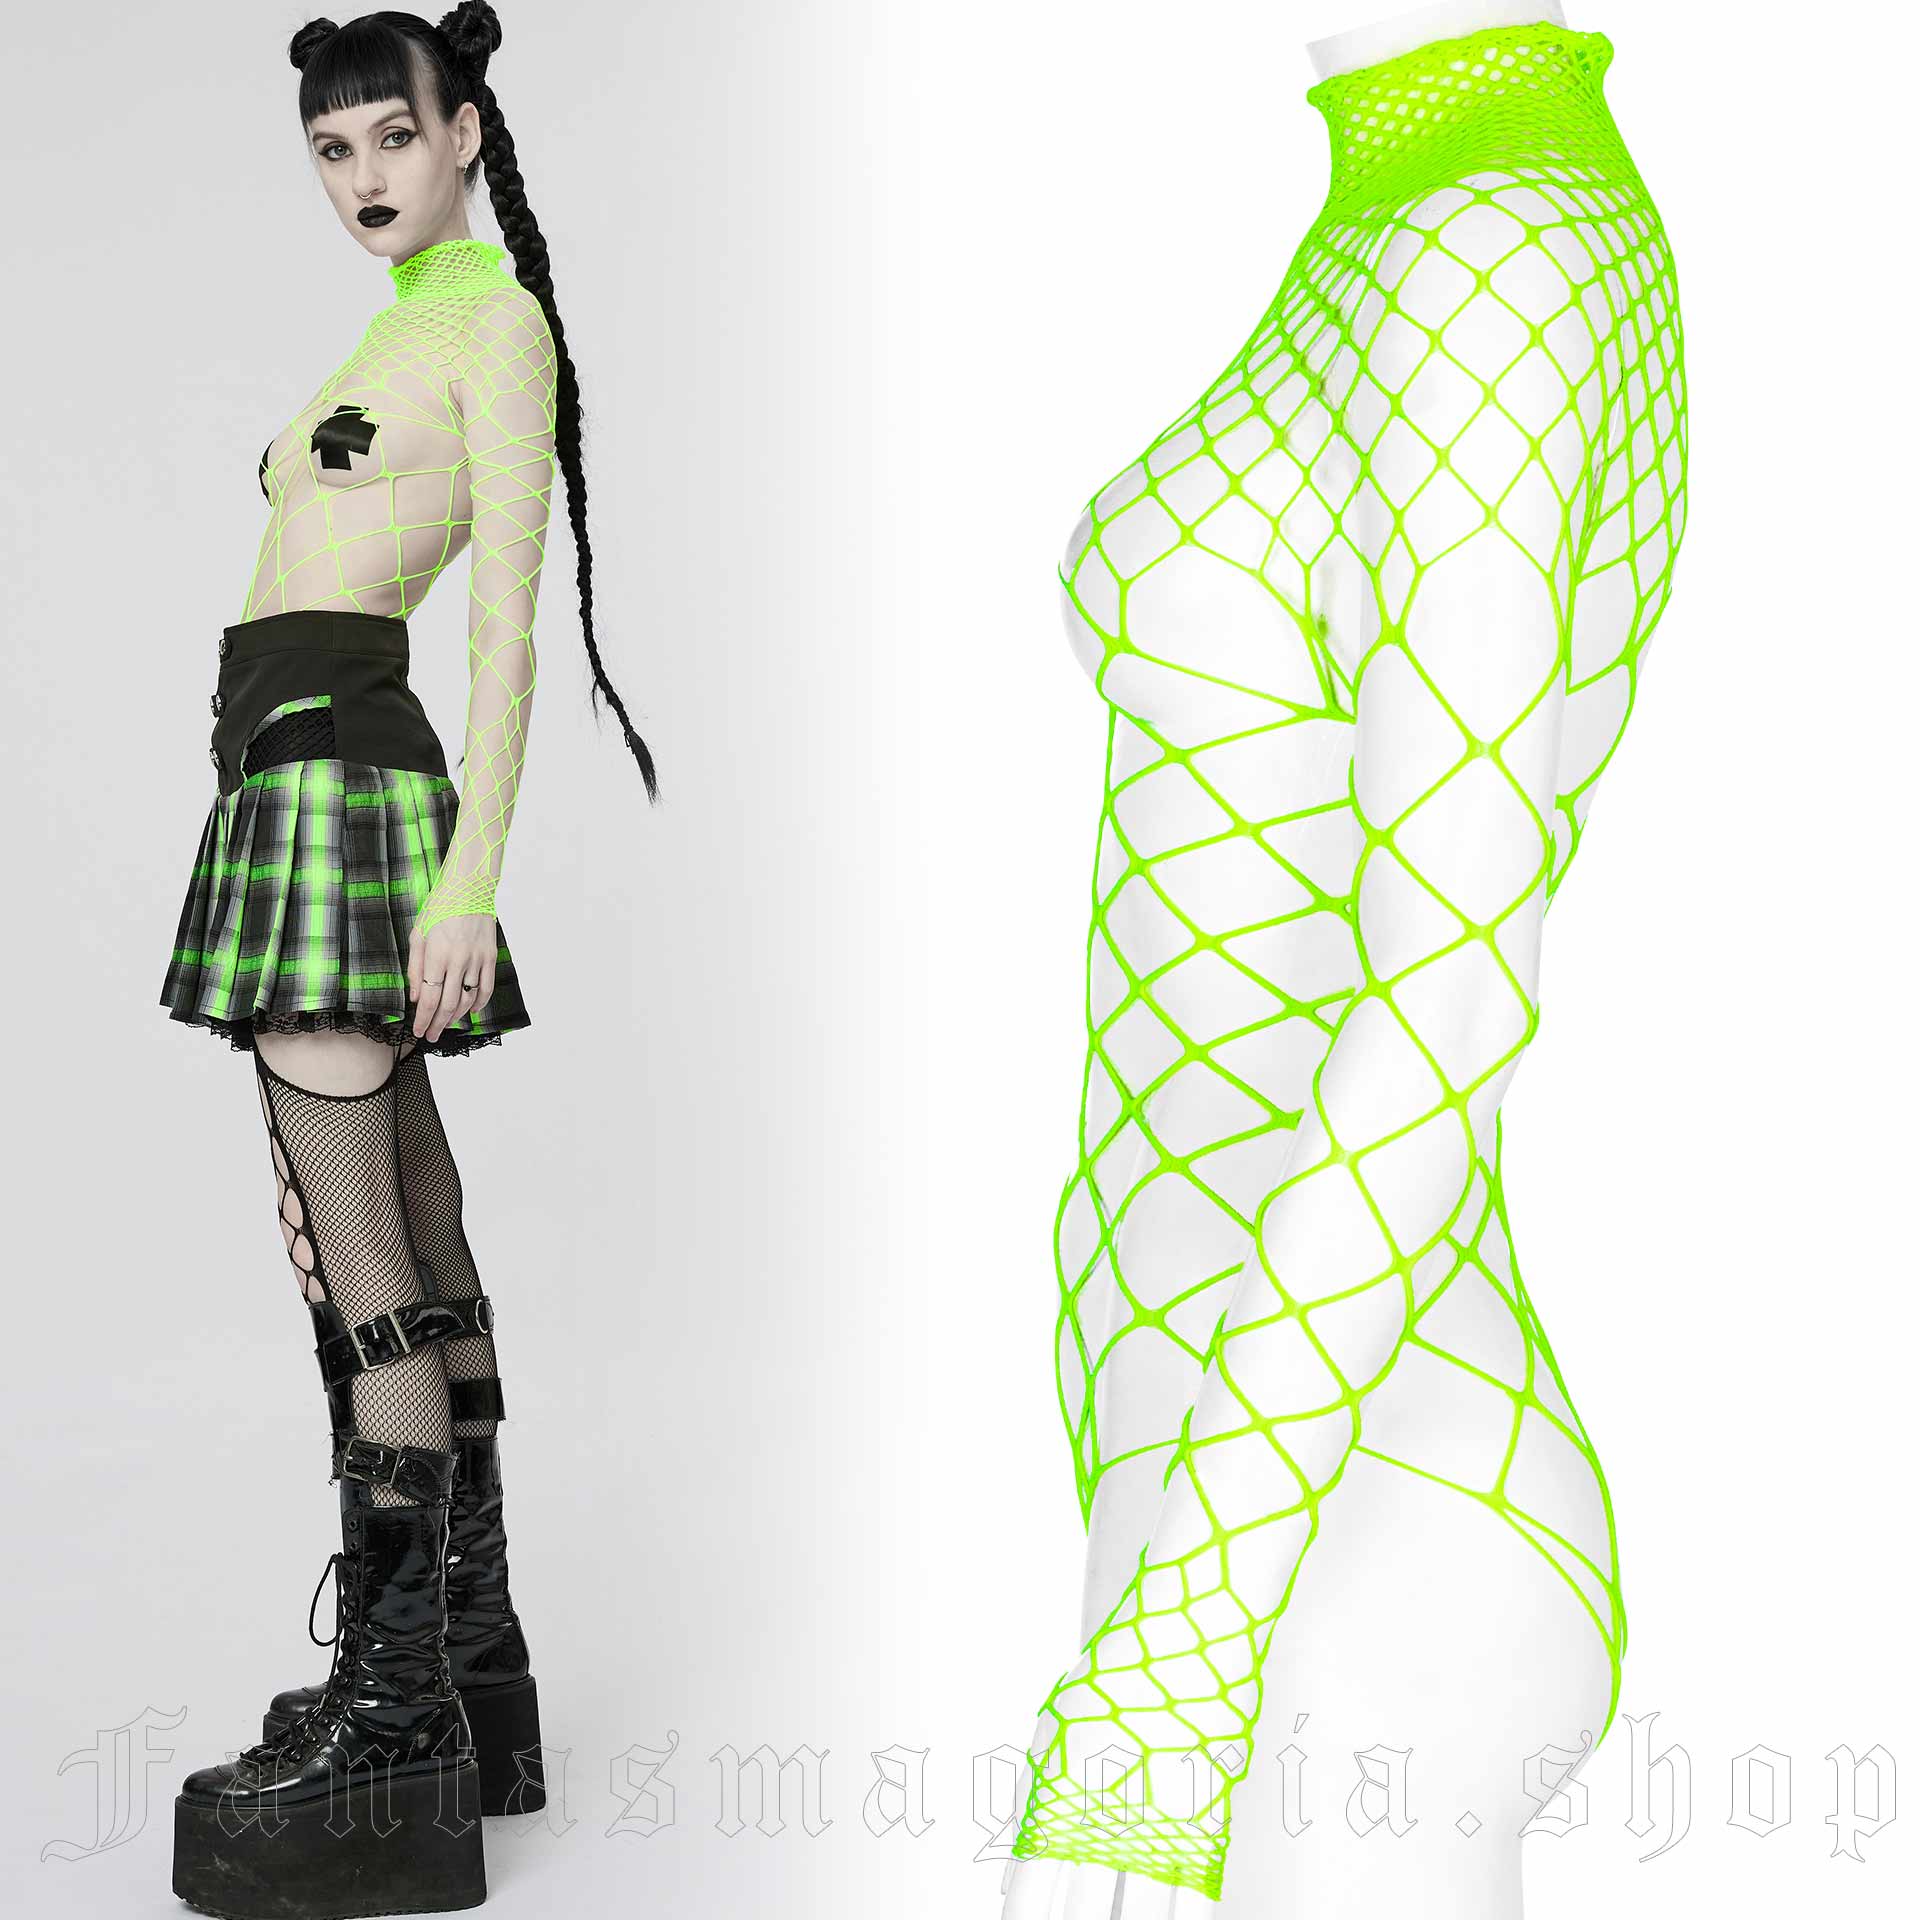 Neon Green Fishnets Pantyhose Rave Club Wear Cosplay Anime Adult One Size  for sale online